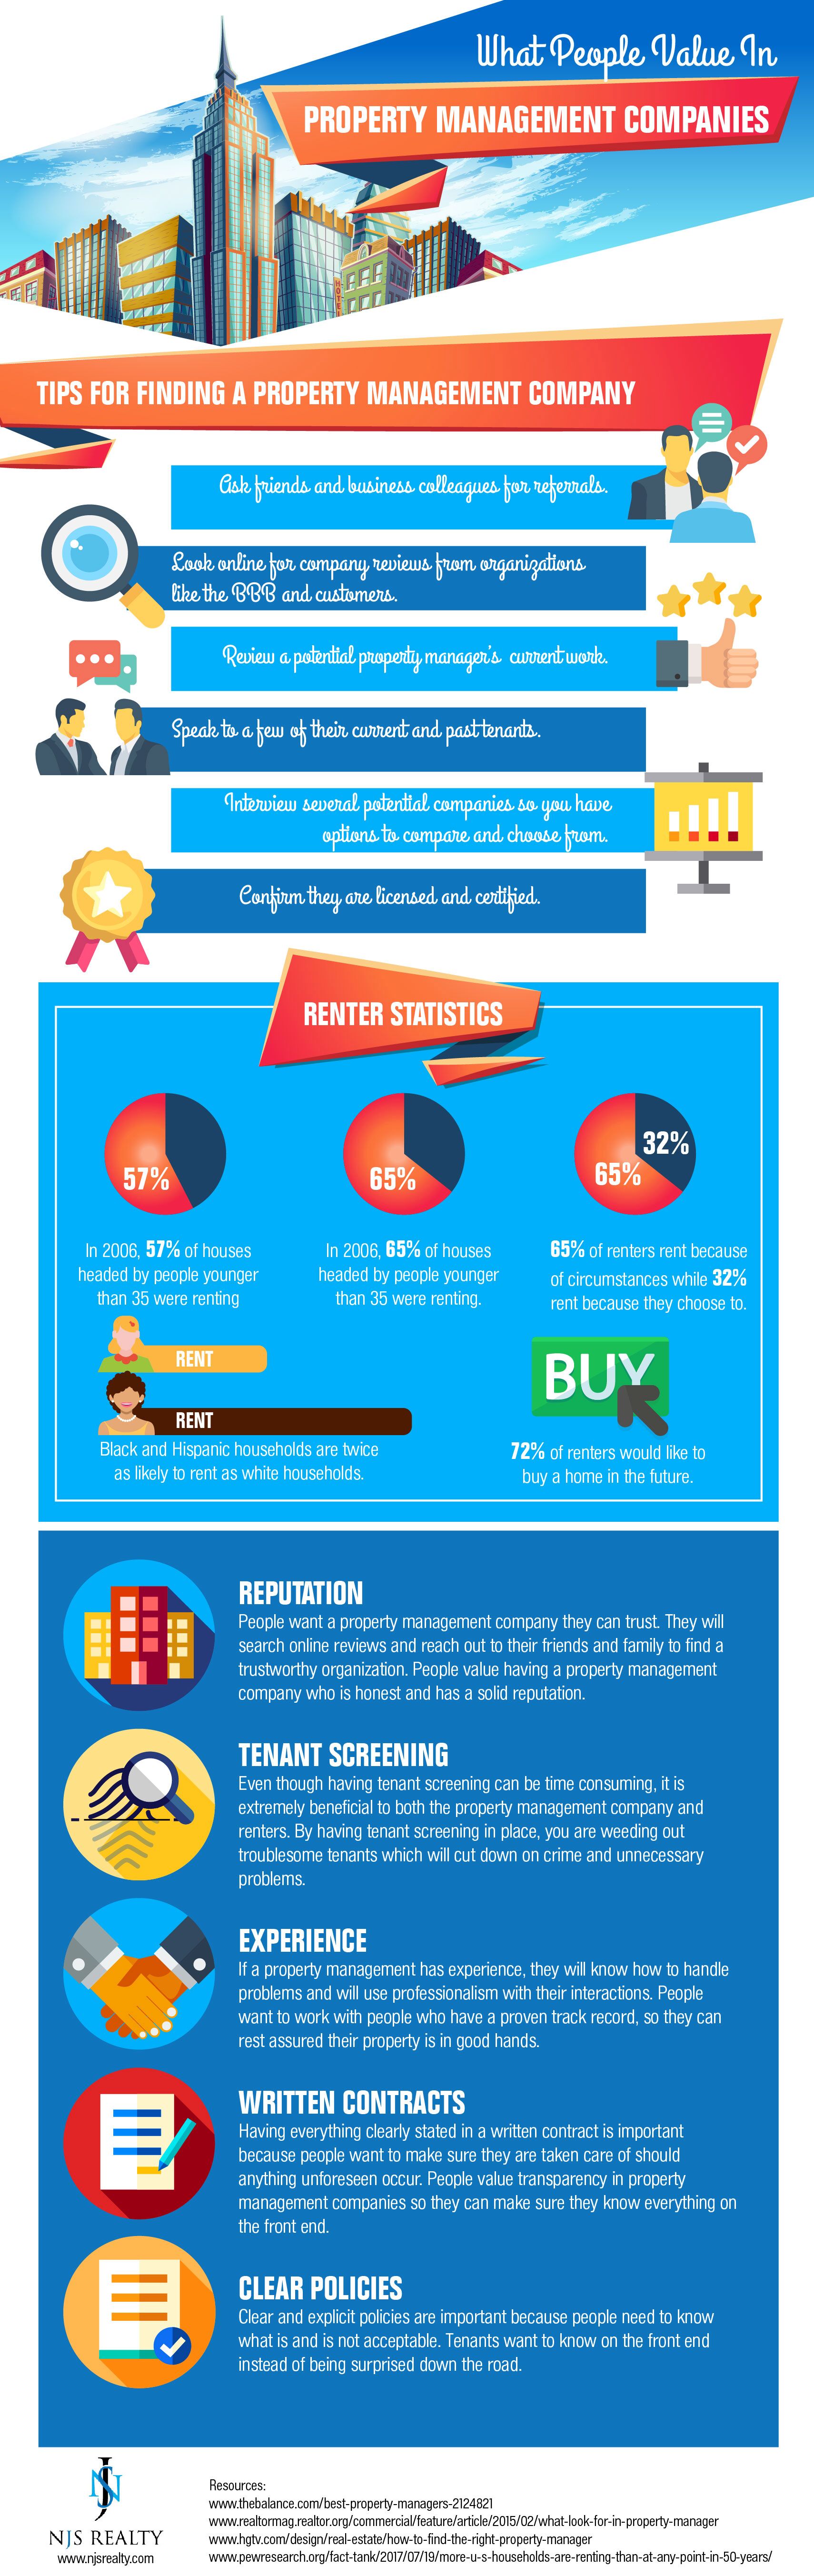 NJS Realty Infographic